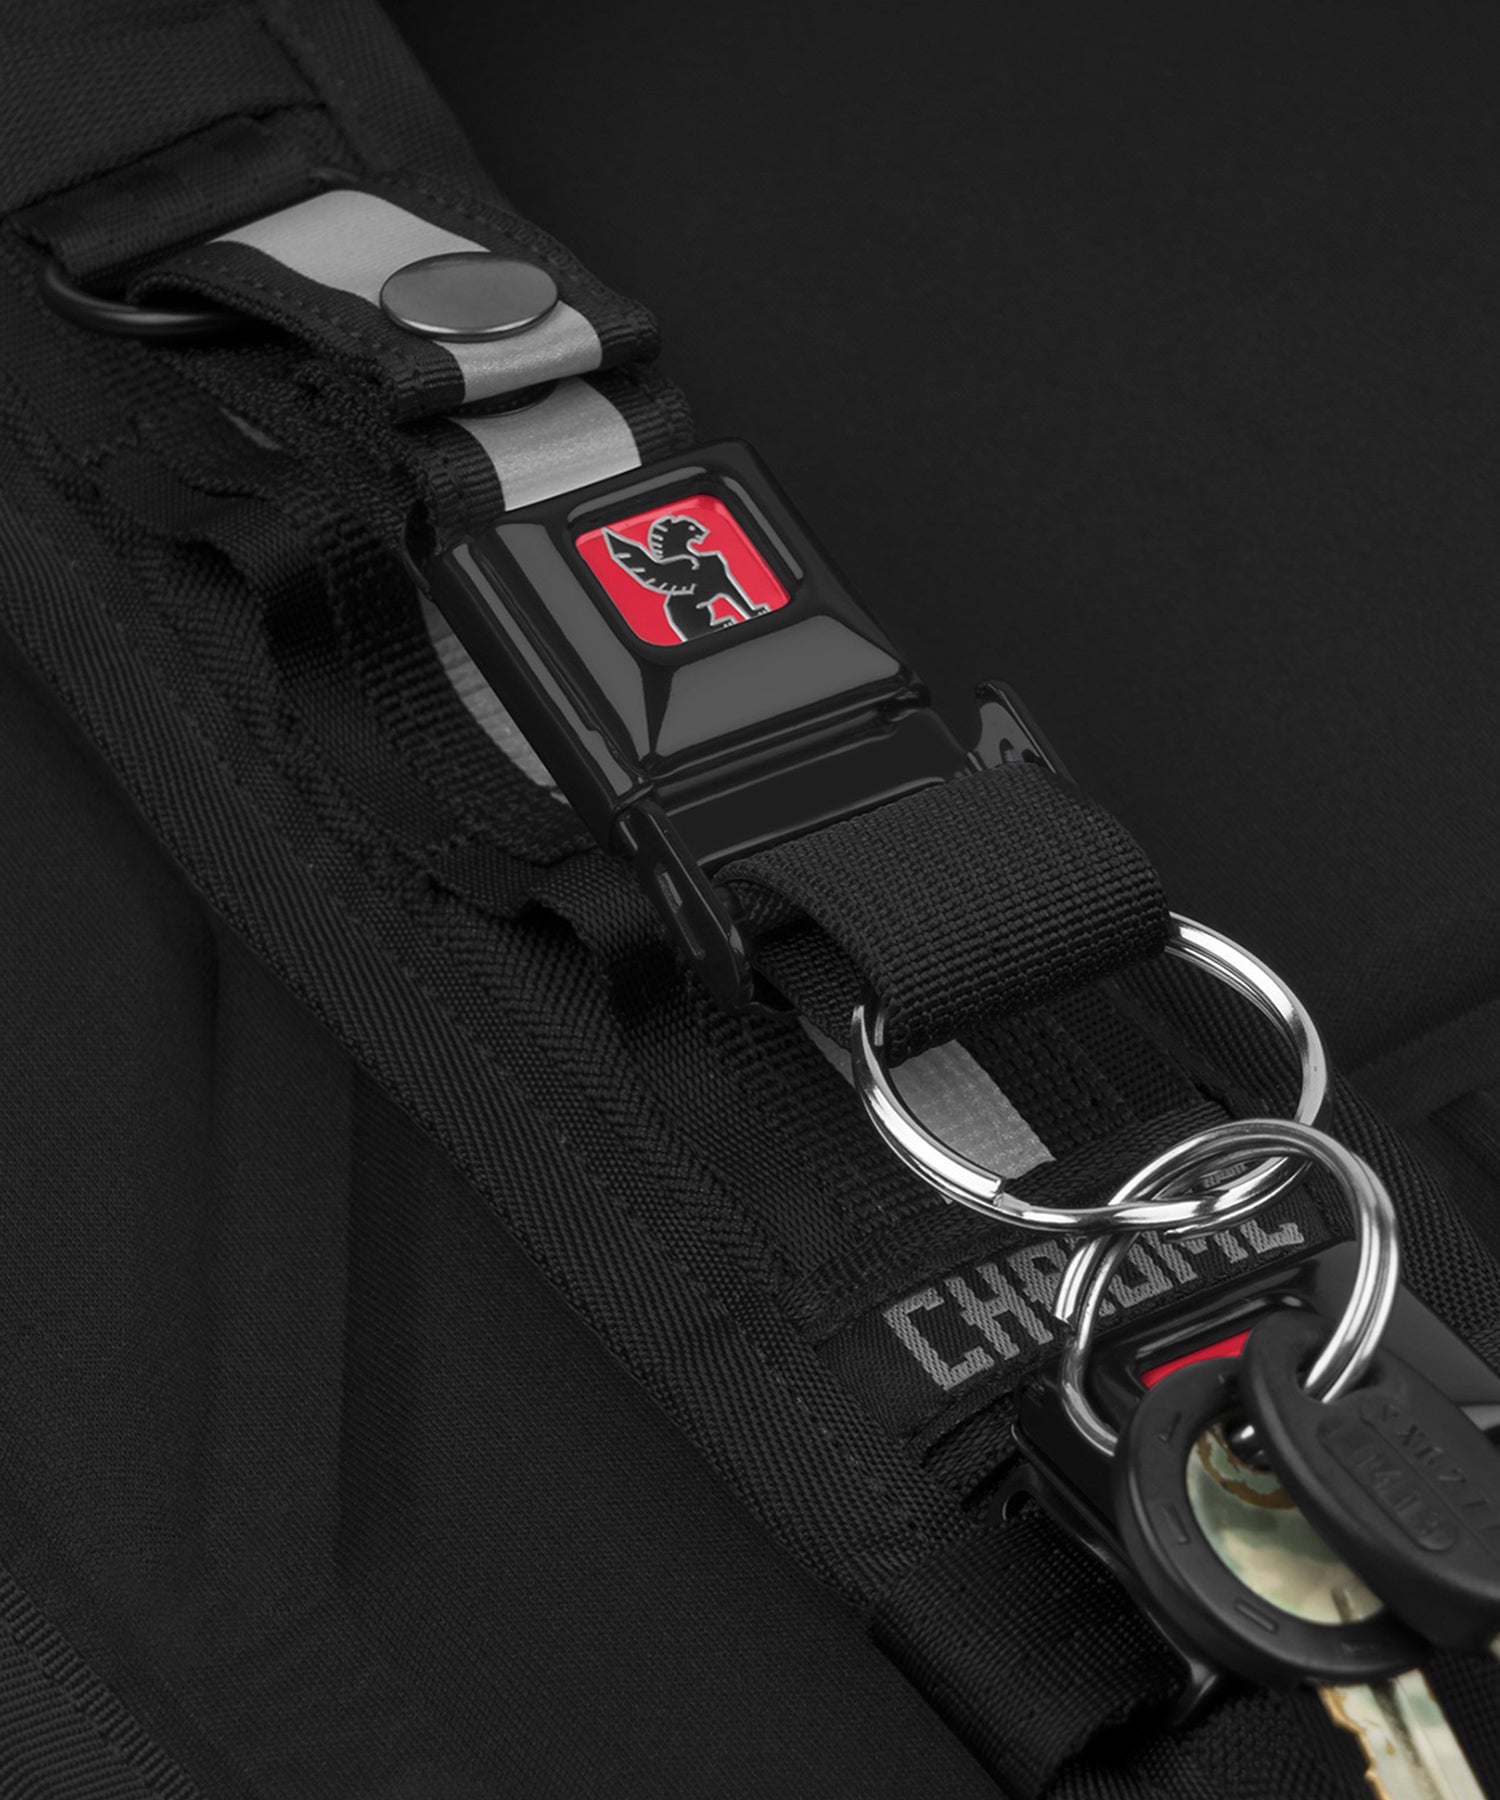 Chrome buckle Keychain linking to all accessories